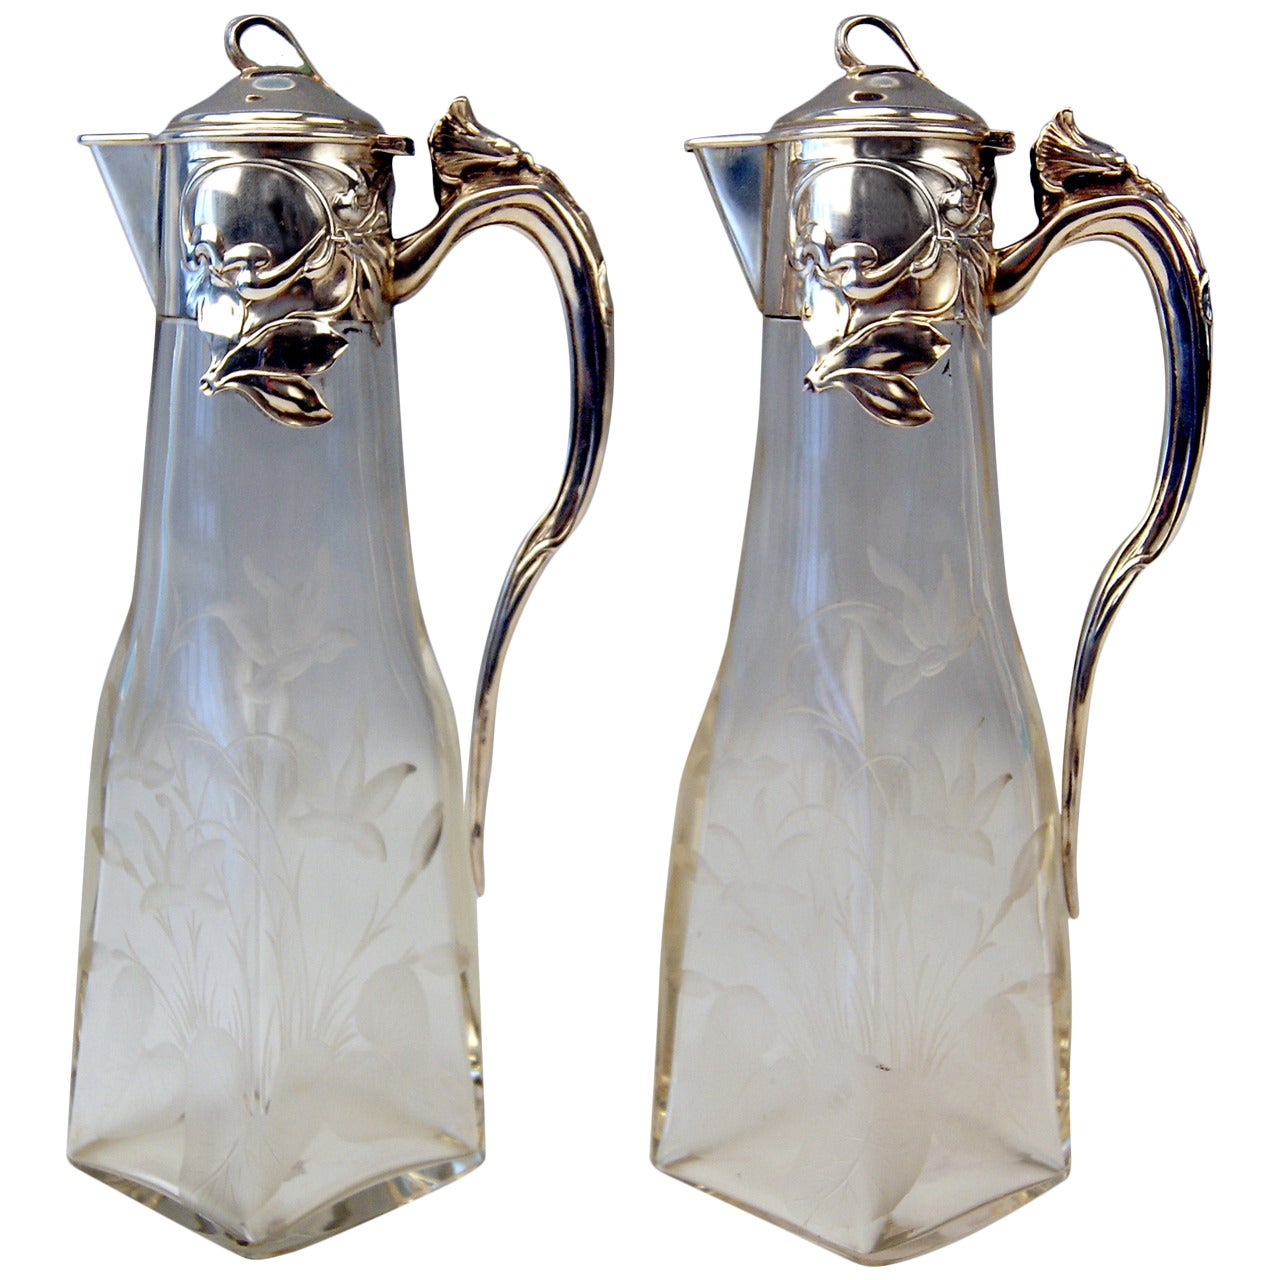 Silver Art Nouveau German Pair of Glass Decanters by Otto Wolter, circa 1900